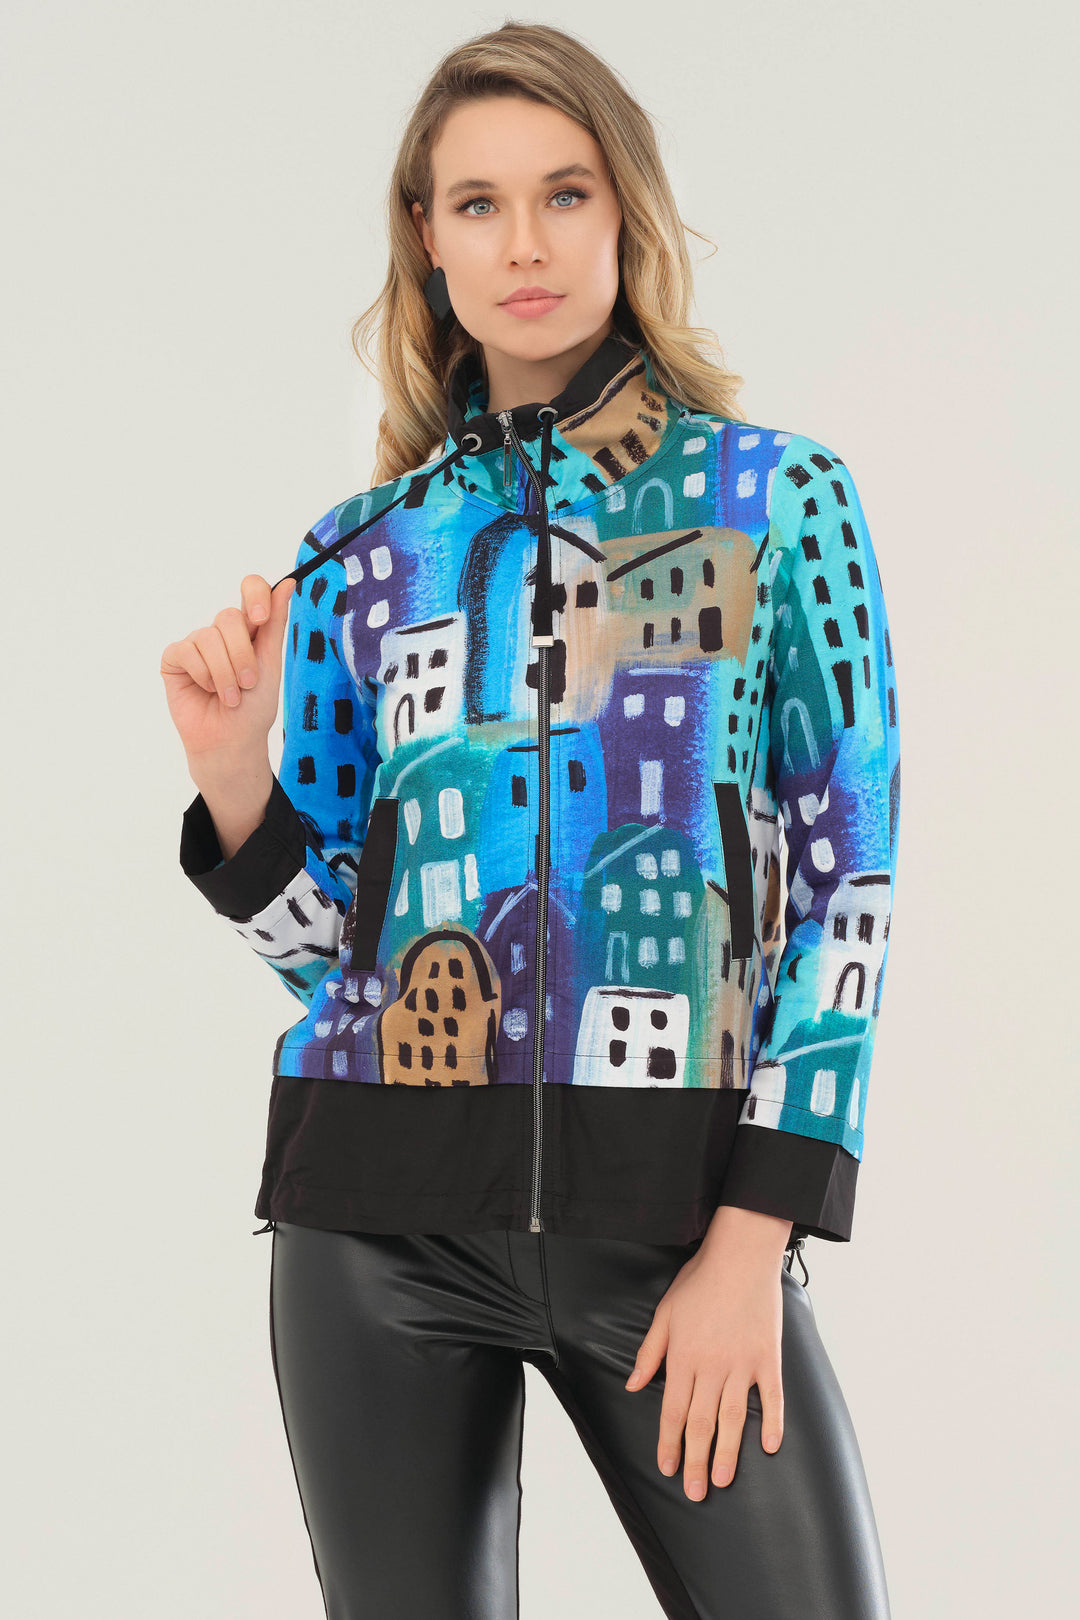 This jacket is artistically designed by Canadian artist Linda Woods, featuring a stand-up collar, front zipper, two front pockets, drawstring waist and long sleeves.